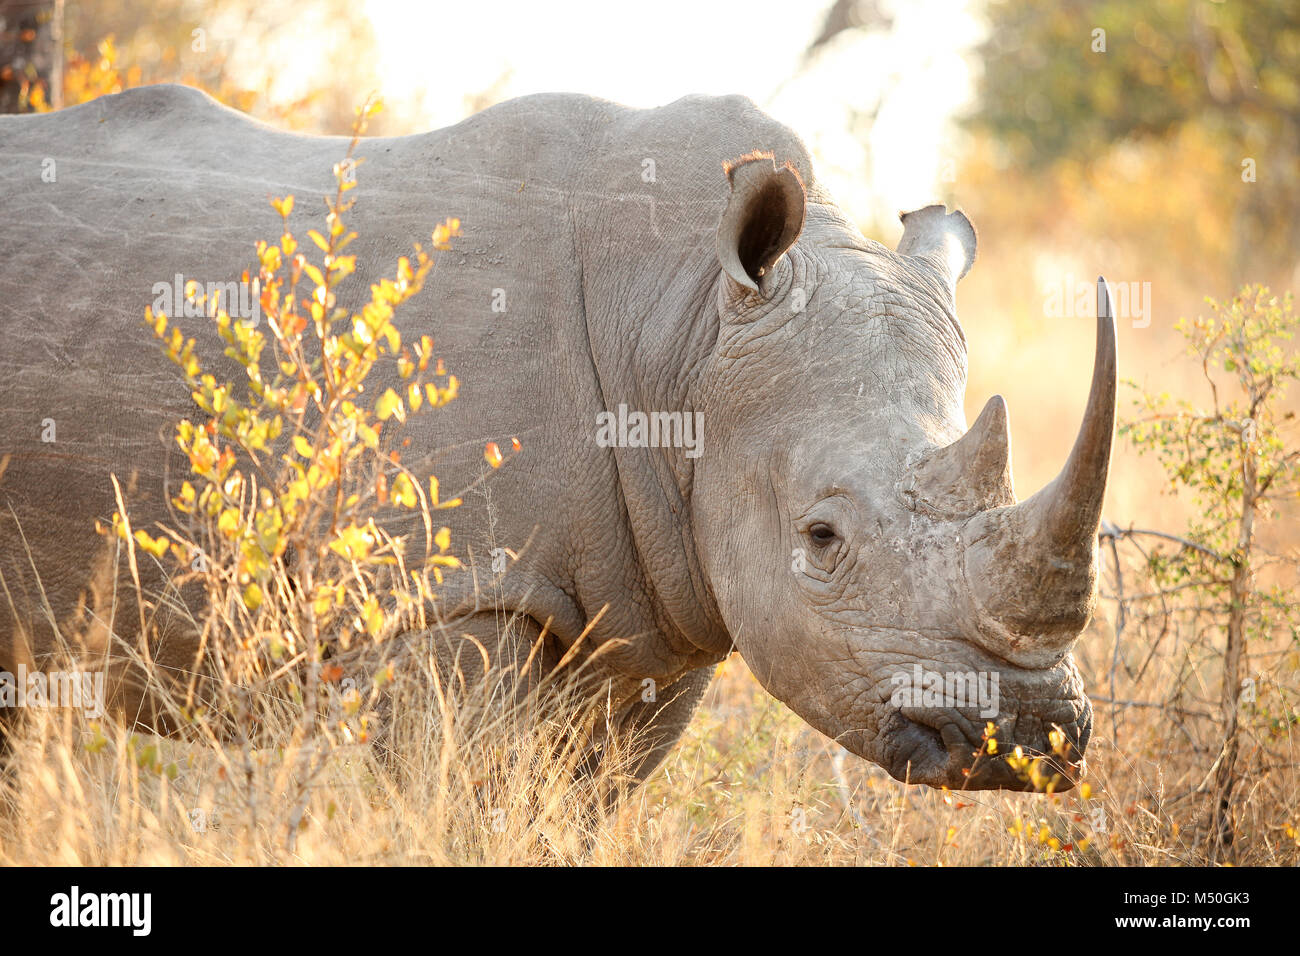 Close up view of an African White Rhino in a South African game reserve Stock Photo